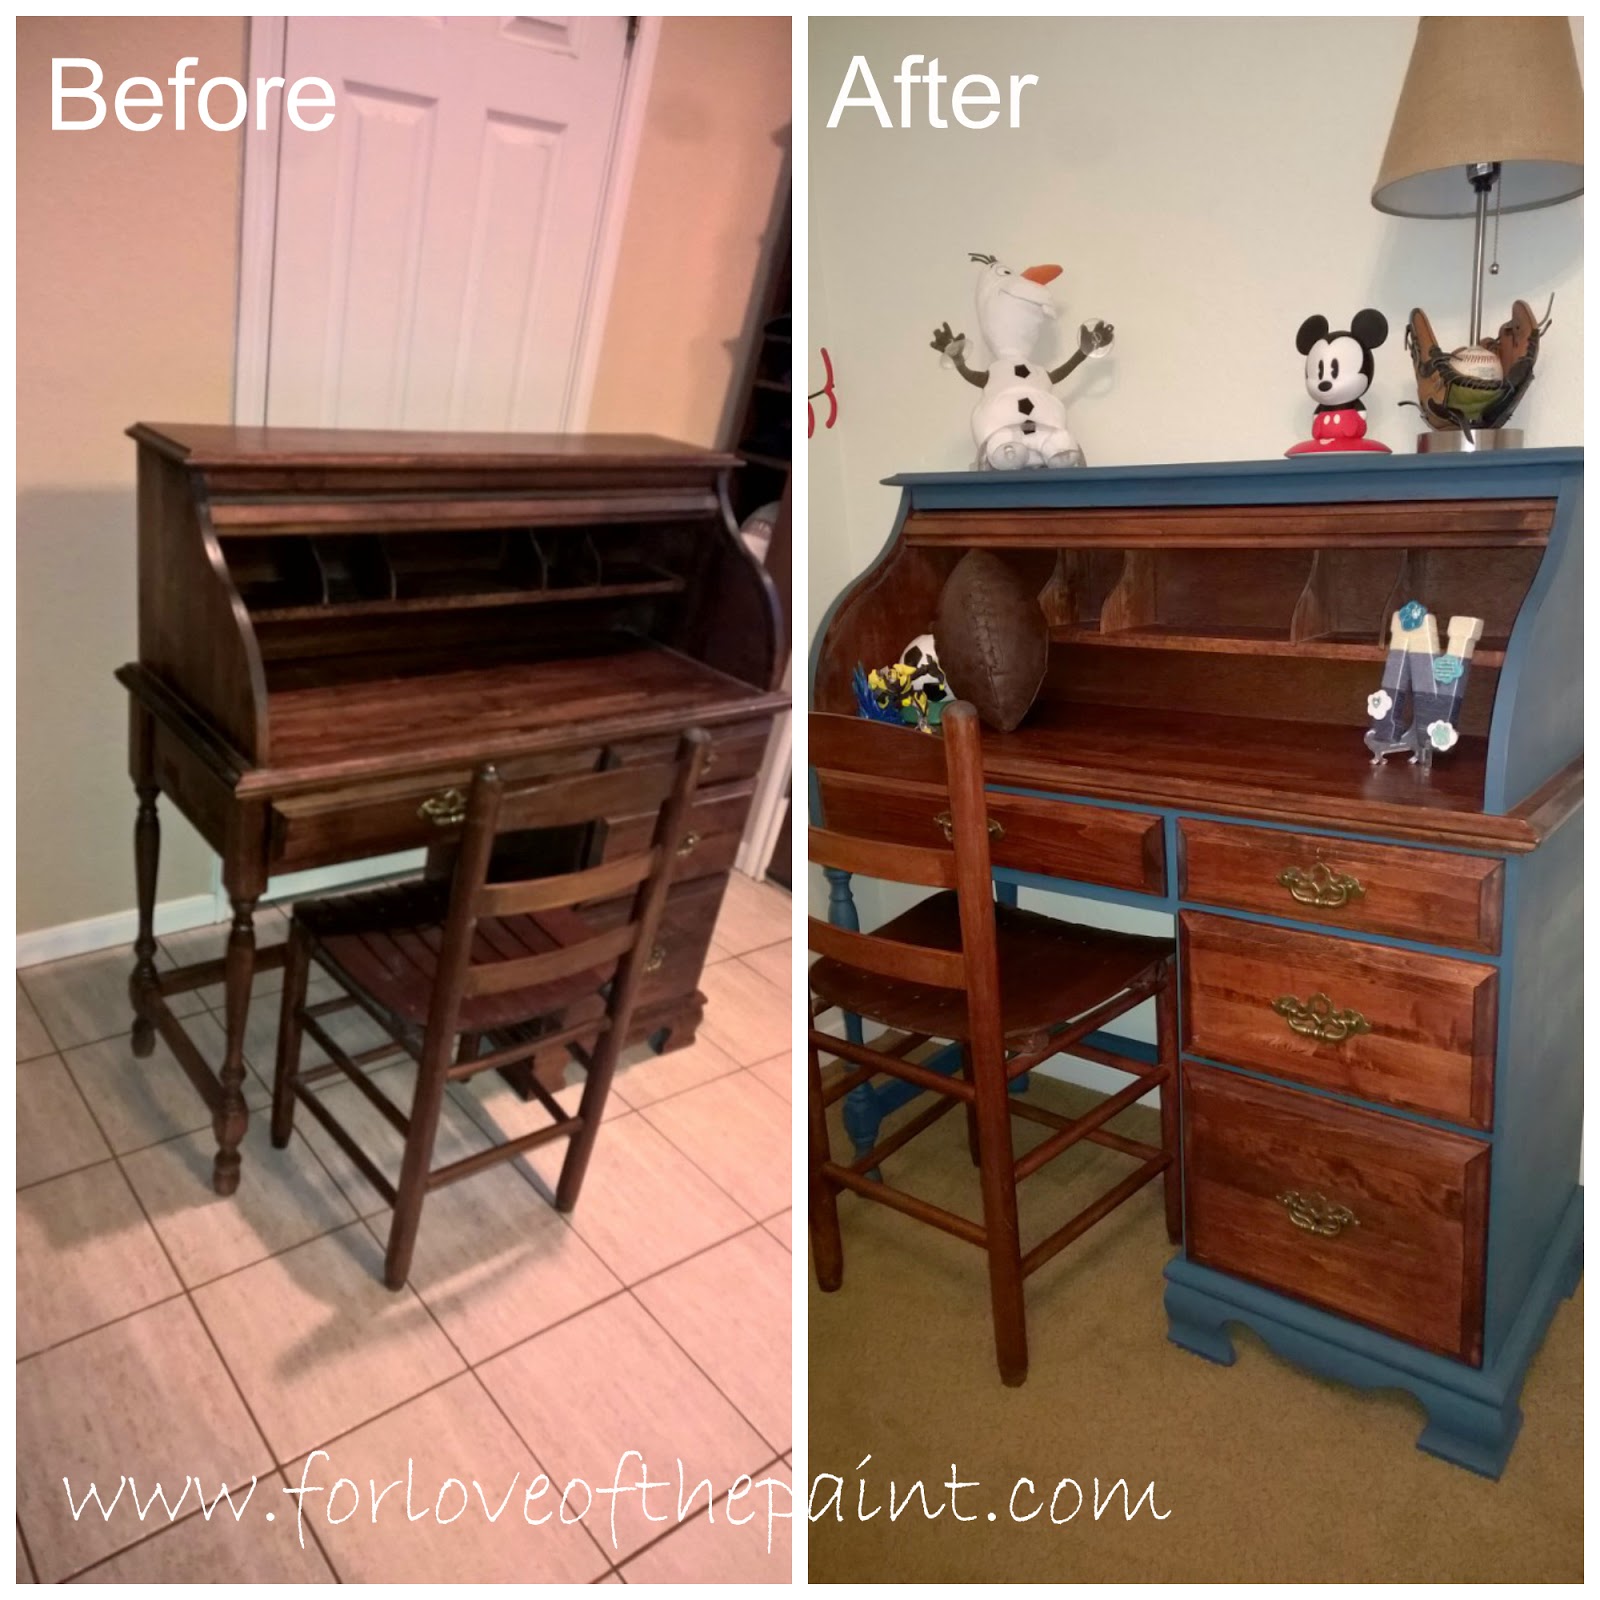 For Love Of The Paint Before And After Vintage Rolltop Desk